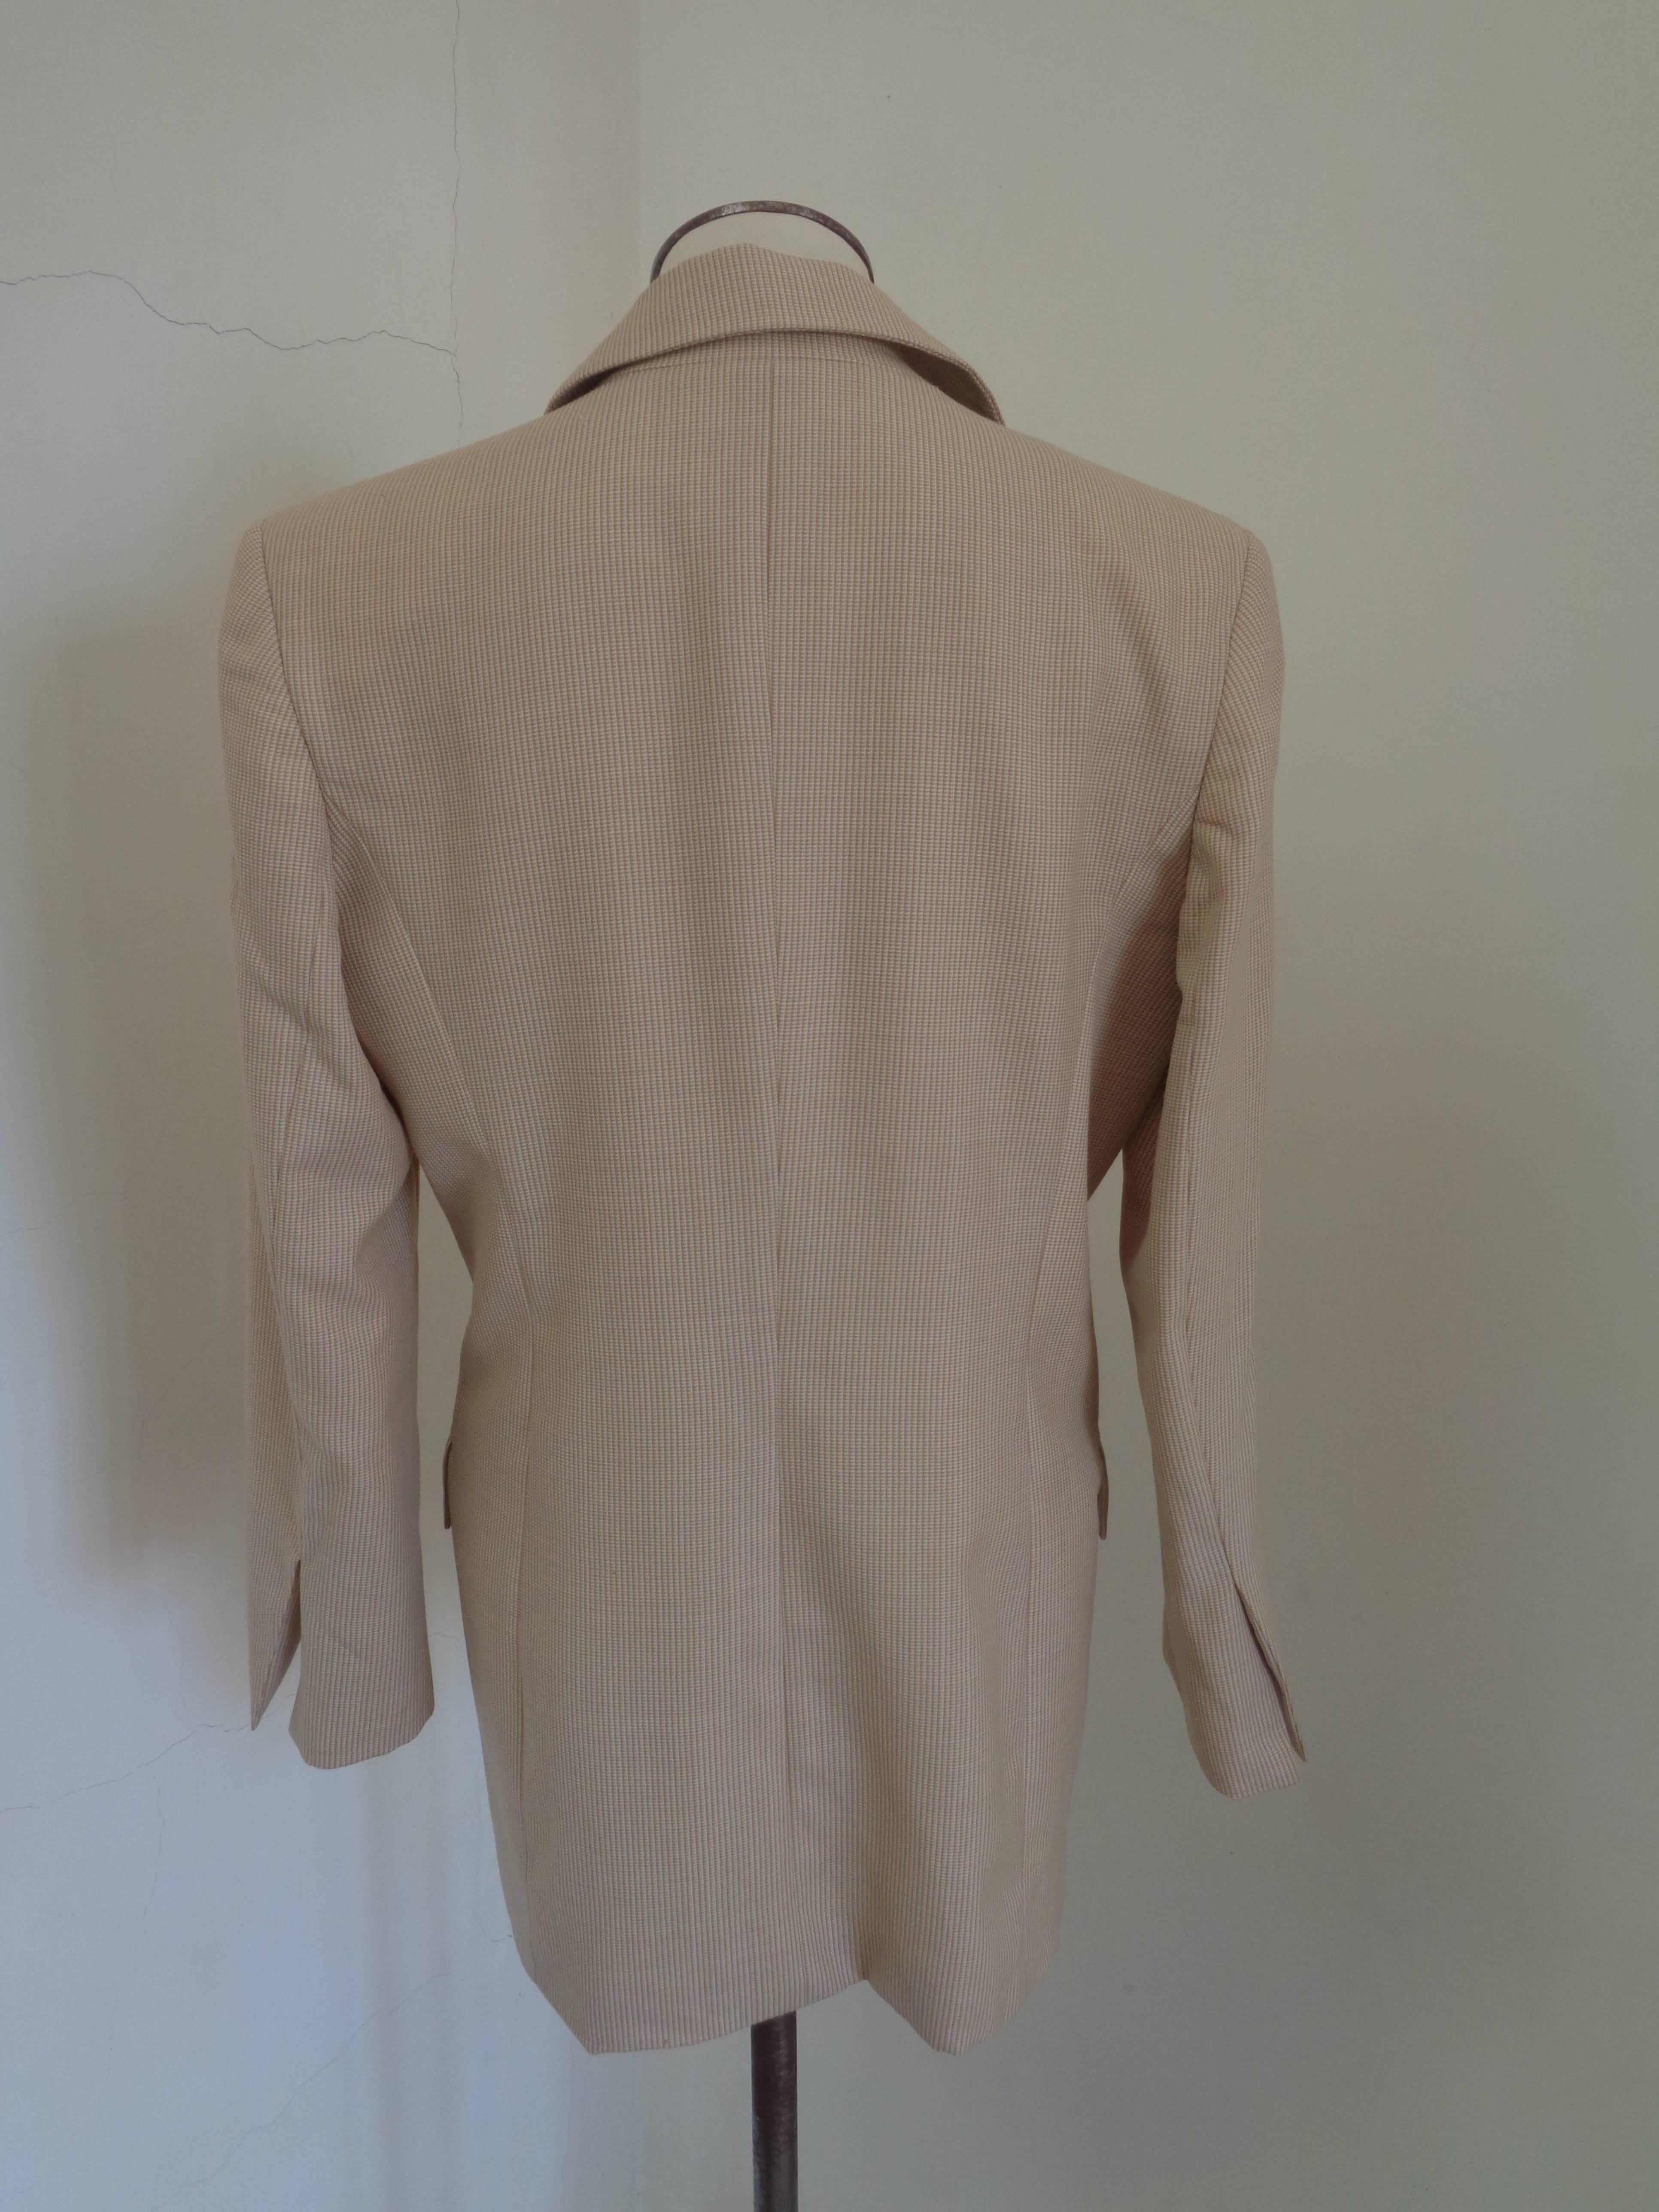 Christian Dior Cordonnes Wool Jacket In Good Condition For Sale In Capri, IT